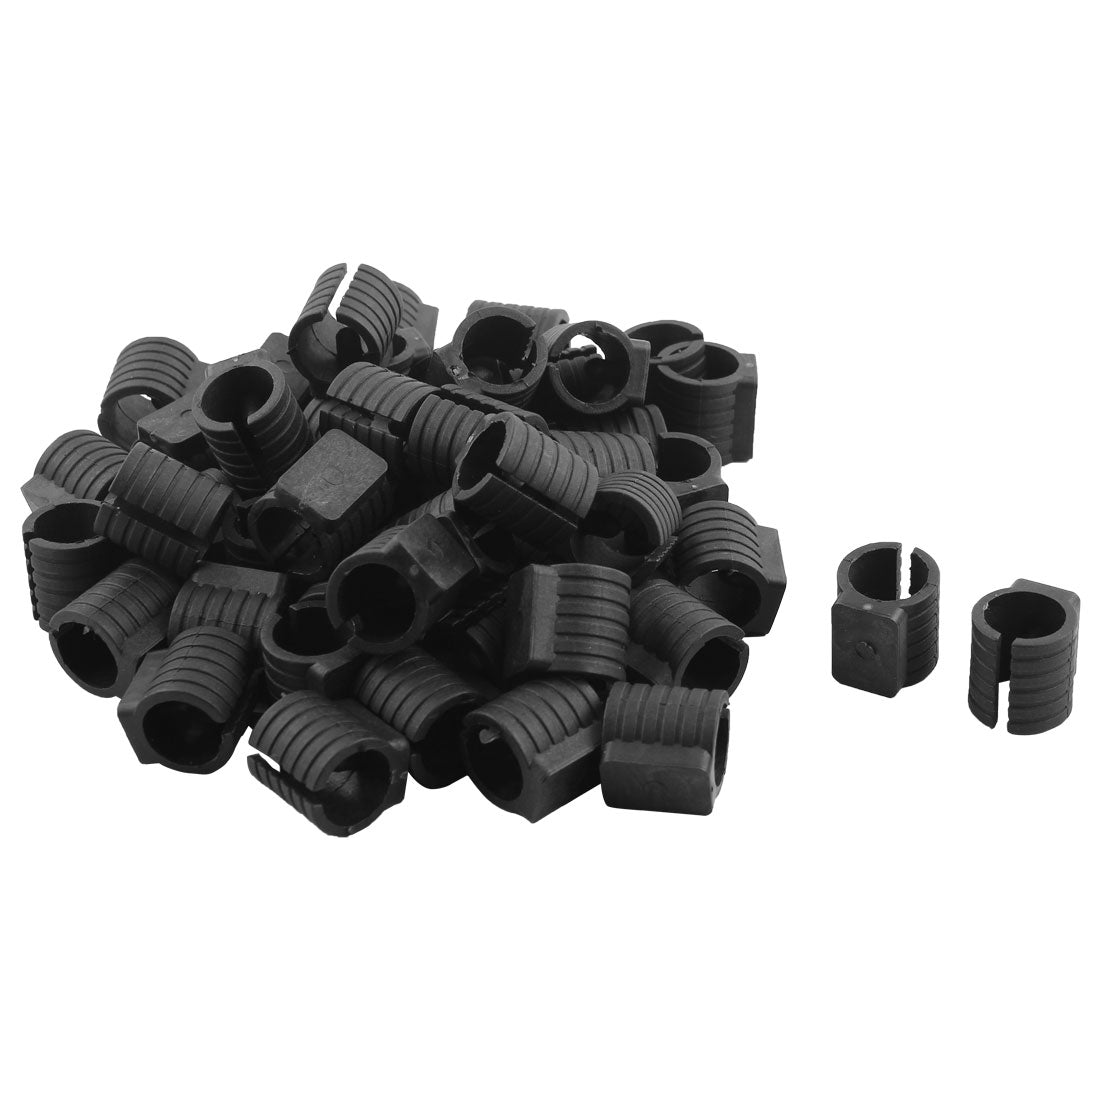 uxcell Uxcell Plastic U-Shaped Chair Pipe Foot Clamp Pads Floor Glides Caps Black 16mm Fit Dia 50pcs